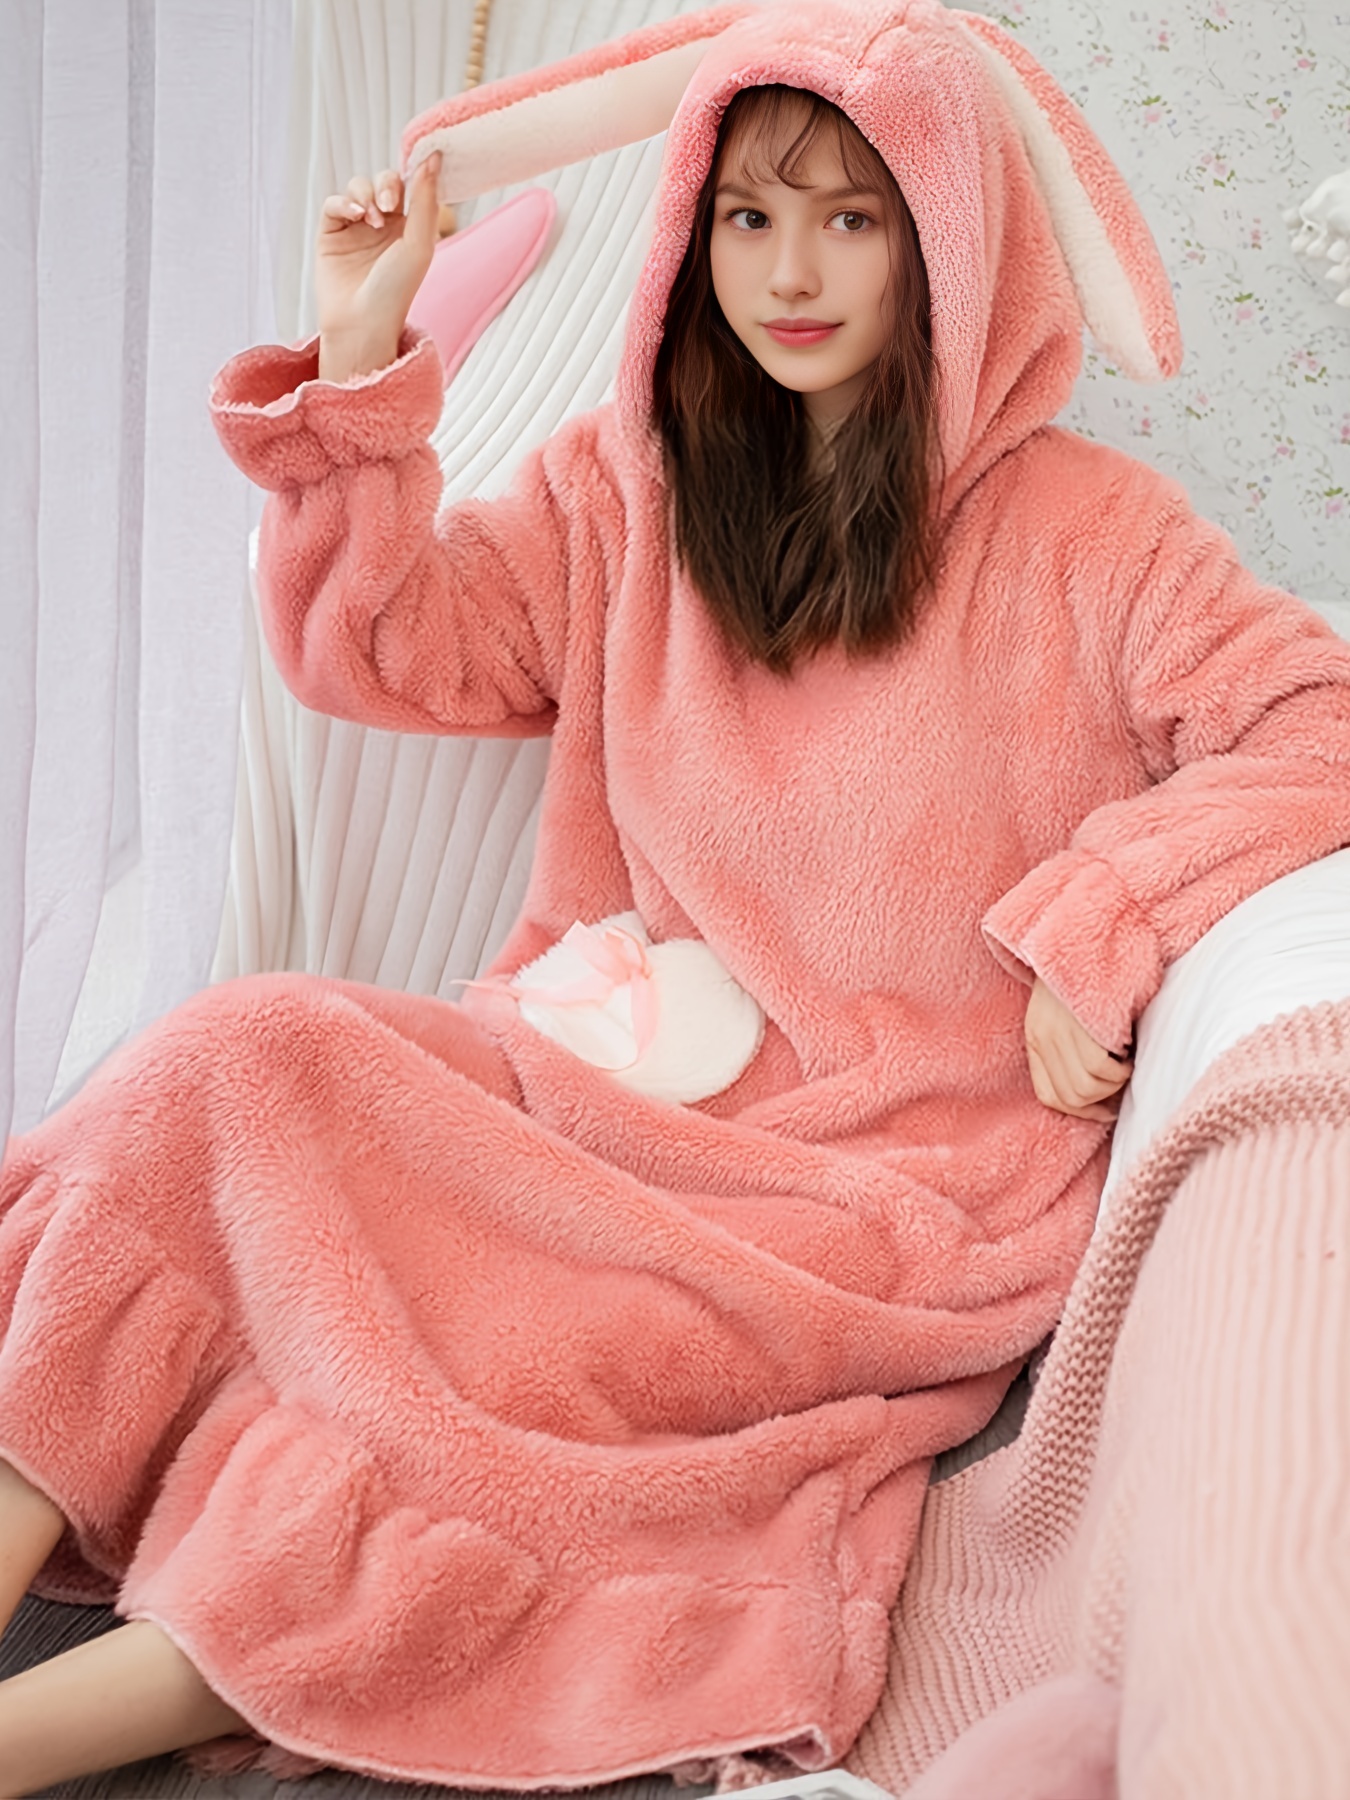 Cute Cartoon Cat Pattern House Robe, Warm & Fuzzy Hooded Lounge Robe With  Pockets, Casual Comfy Robes, Women's Sleepwear 